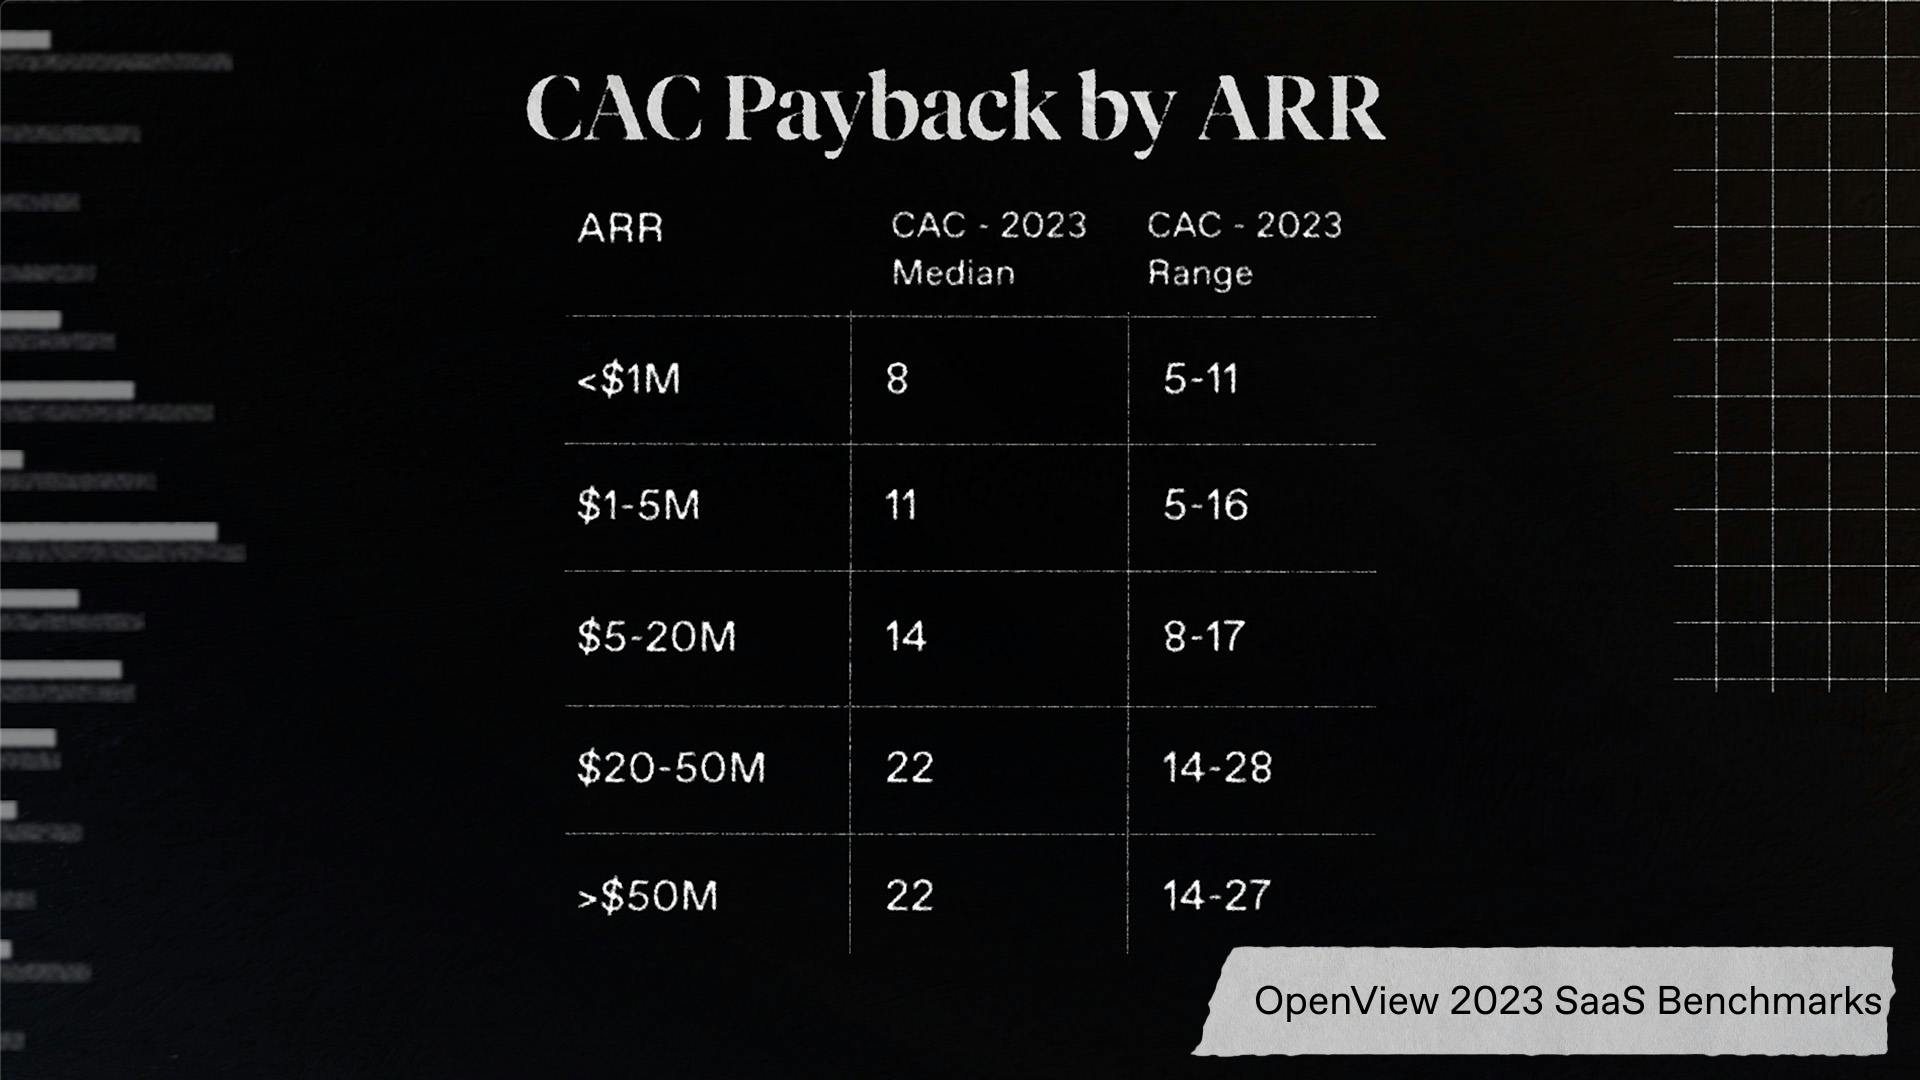 CAC Payback by ARR